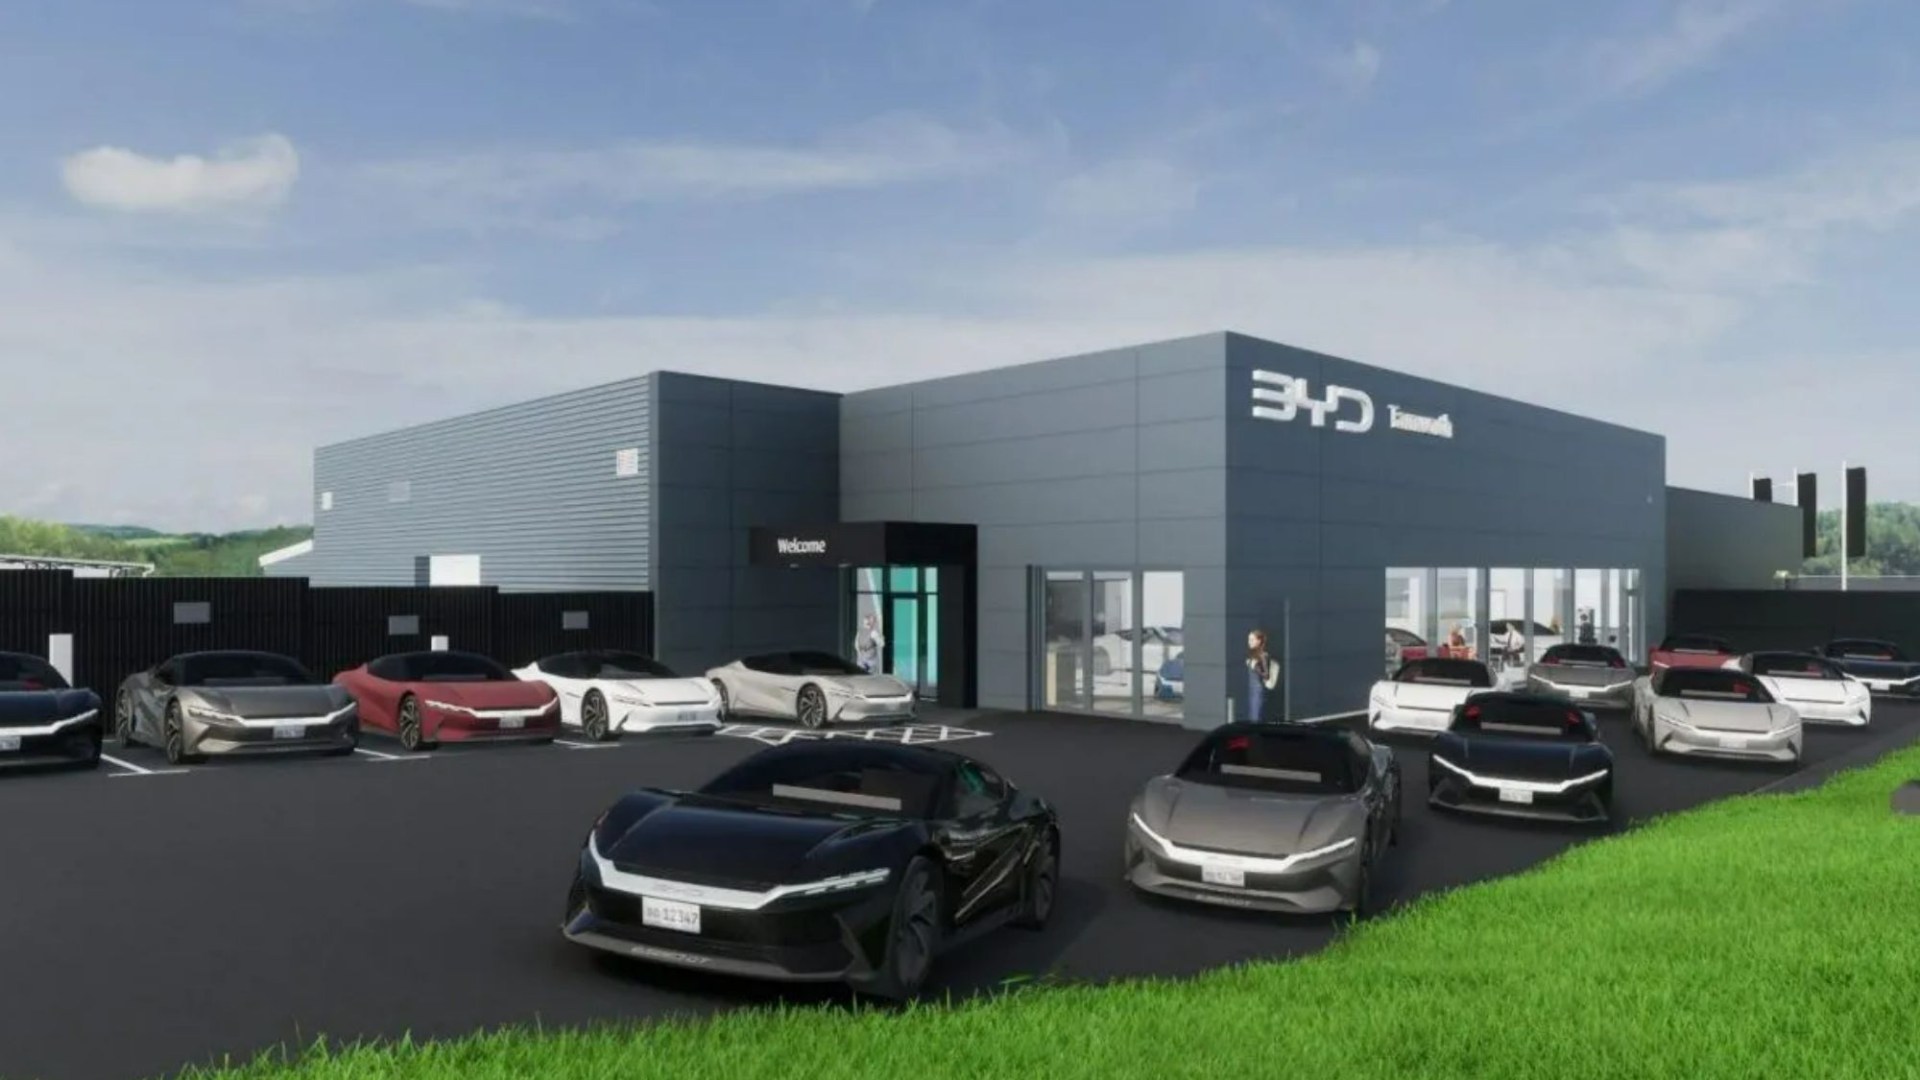 Huge car dealership which opened in 1966 gets new lease on life as major EV maker moves in [Video]